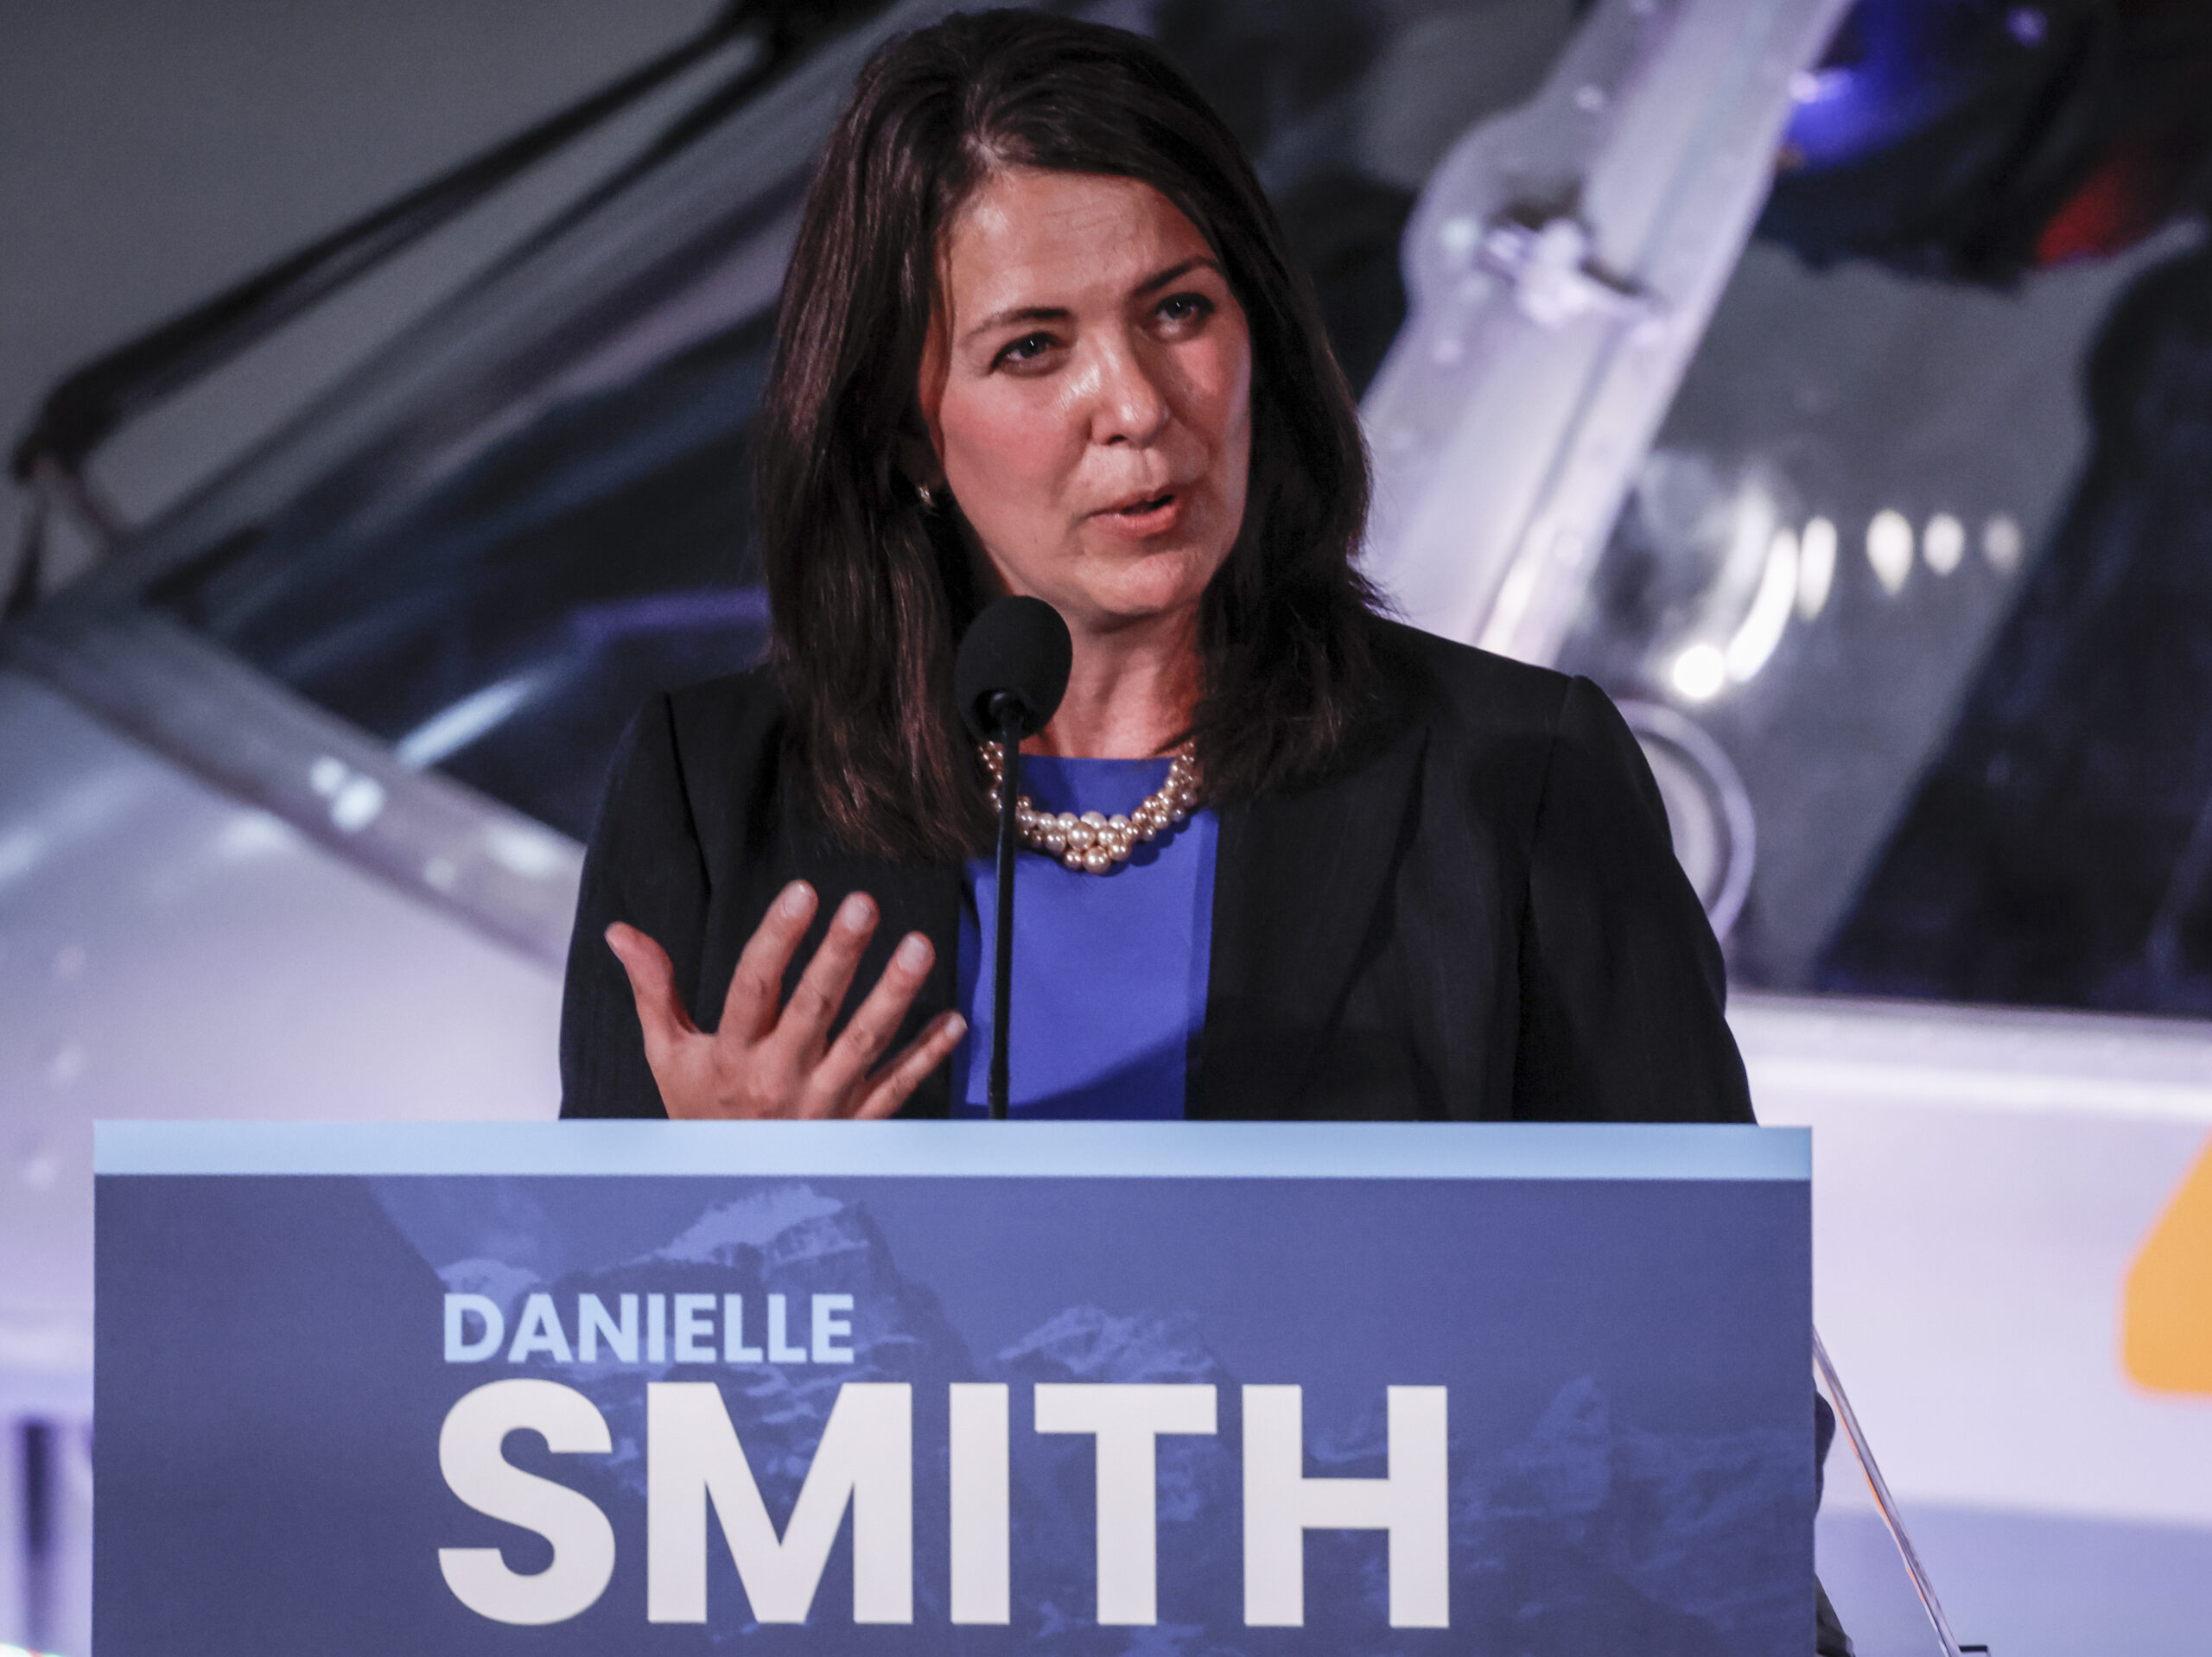 What Danielle Smith's win means for Alberta's climate | The Narwhal